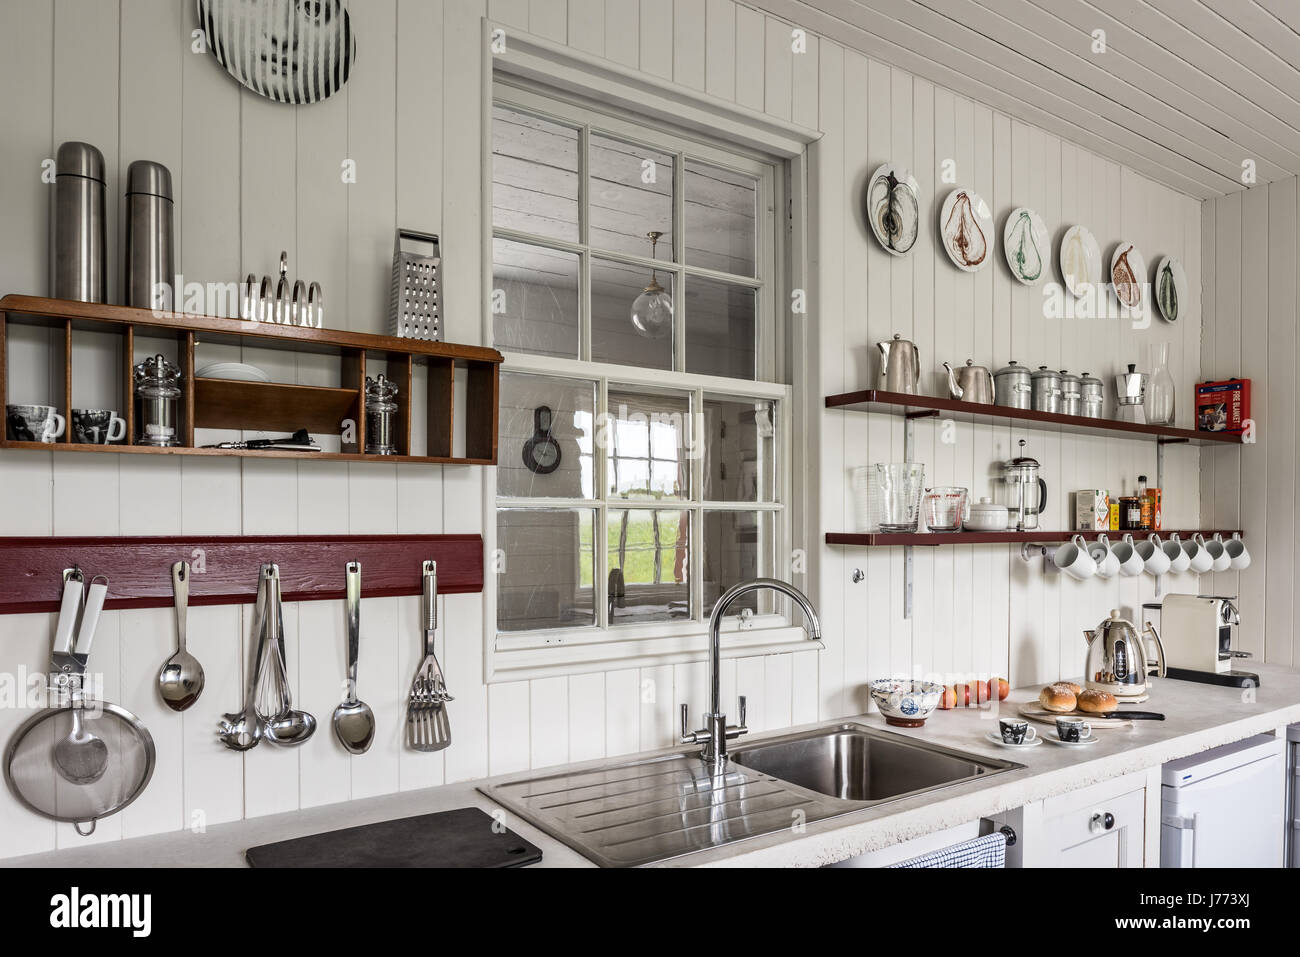 Kitchenware on shelves with stainless steel sink in 17th century Kintyre stone cottage Stock Photo